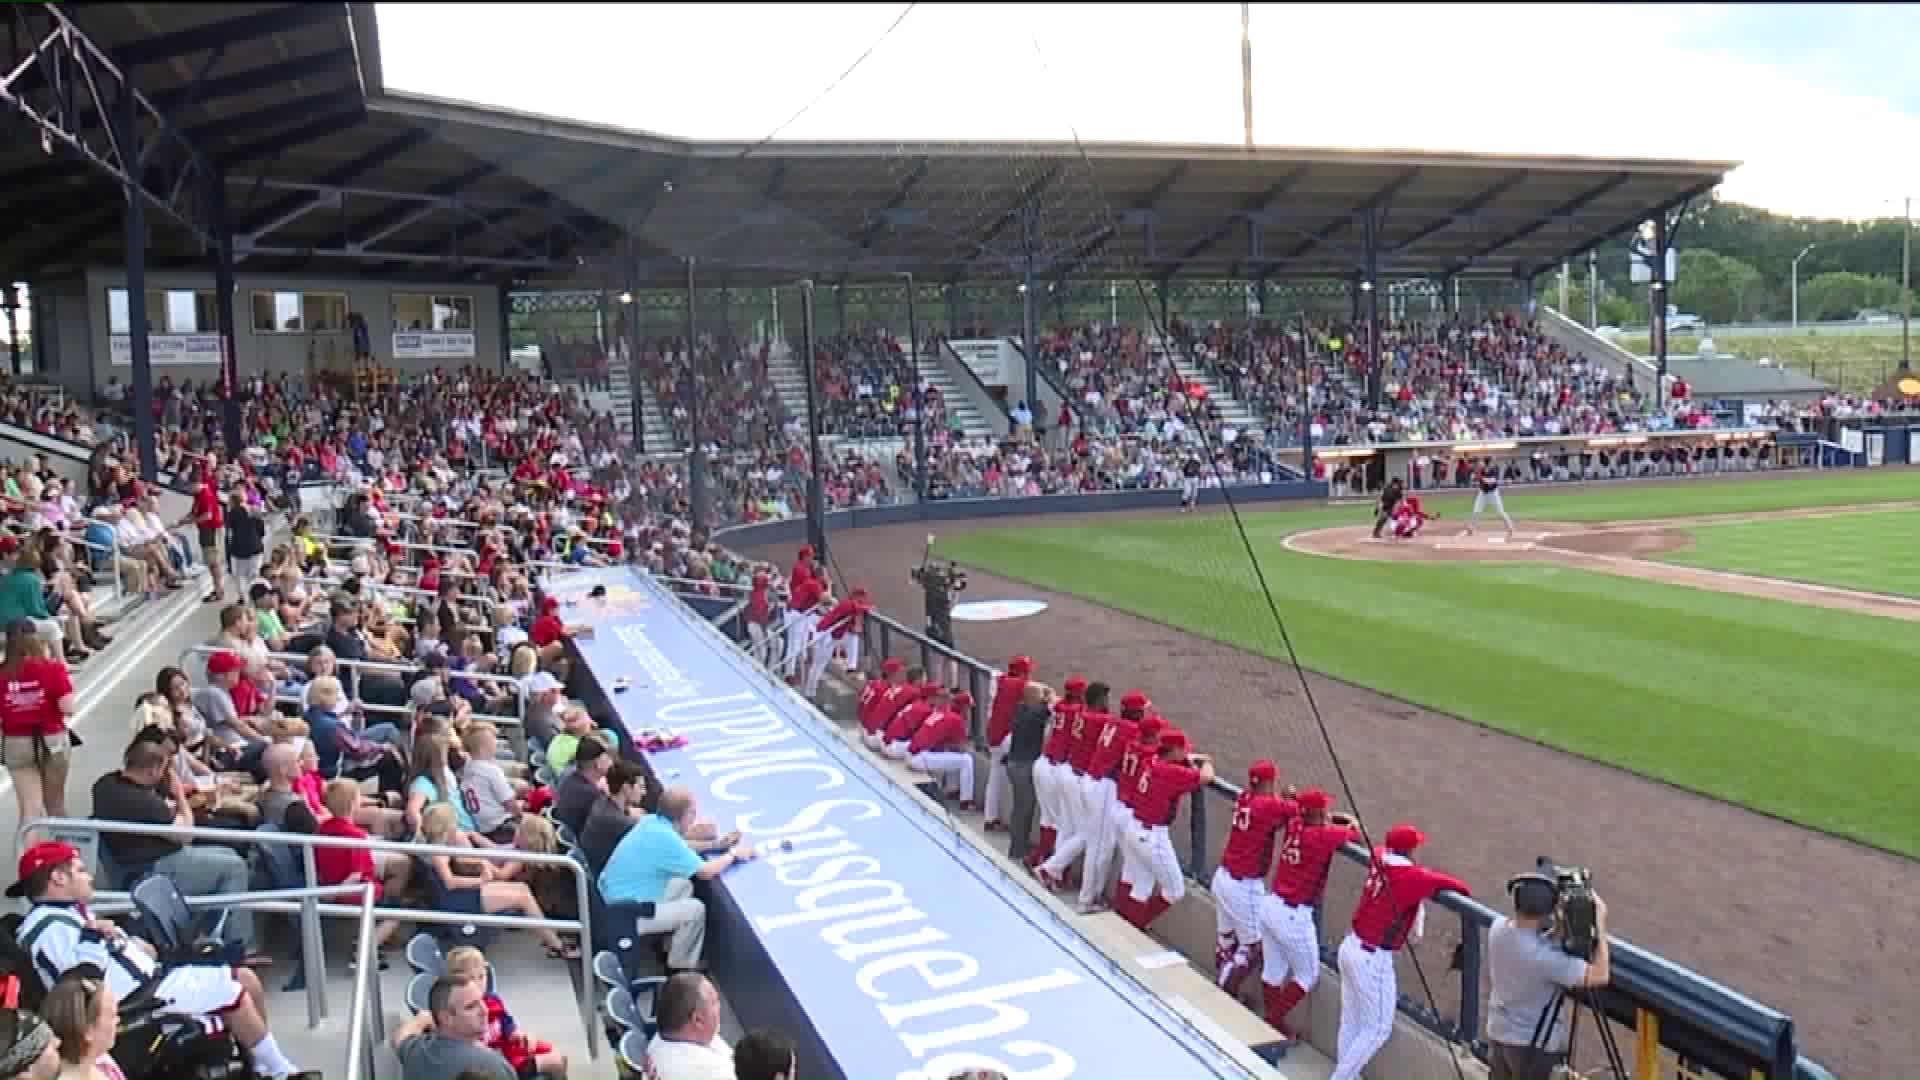 In Williamsport, Fans Check out Facelift at Historic Bowman Field